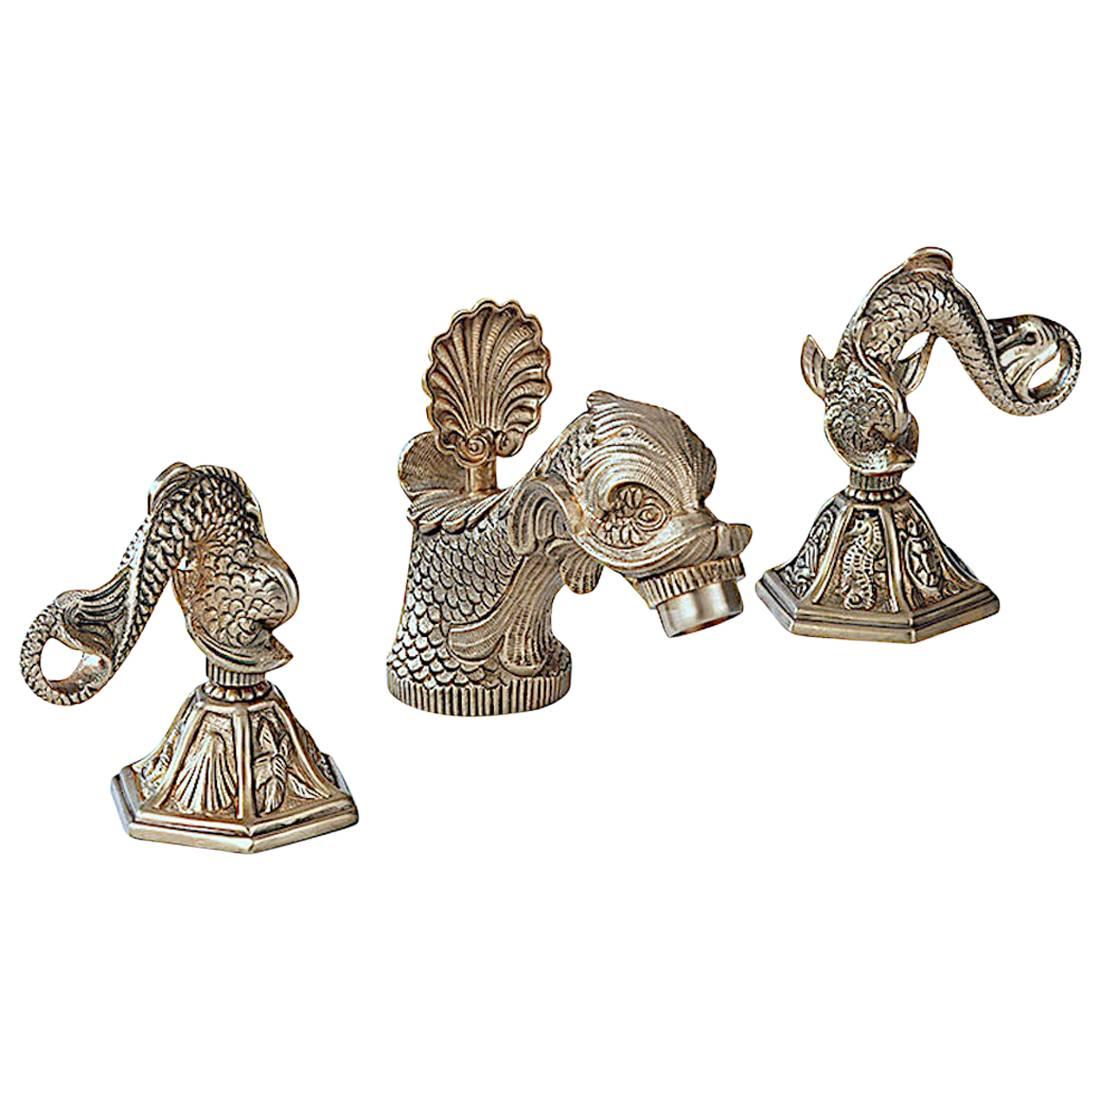 Elegant Sherle Wagner Vintage Dolphin Faucet Set in Silver Finish For Sale